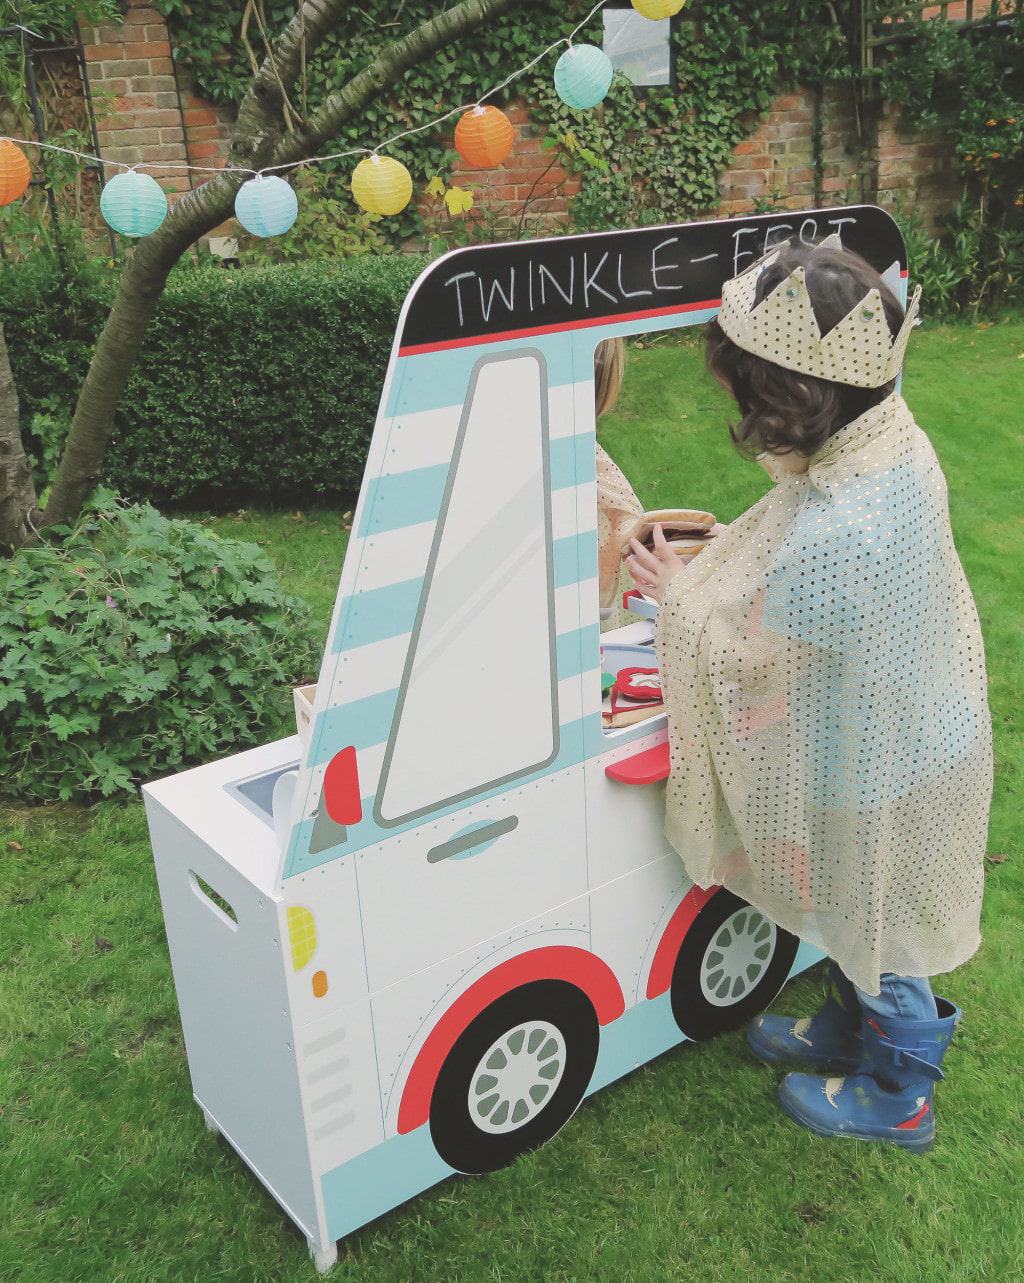 The GLTC festival food van / play kitchen — perfect for imaginative play